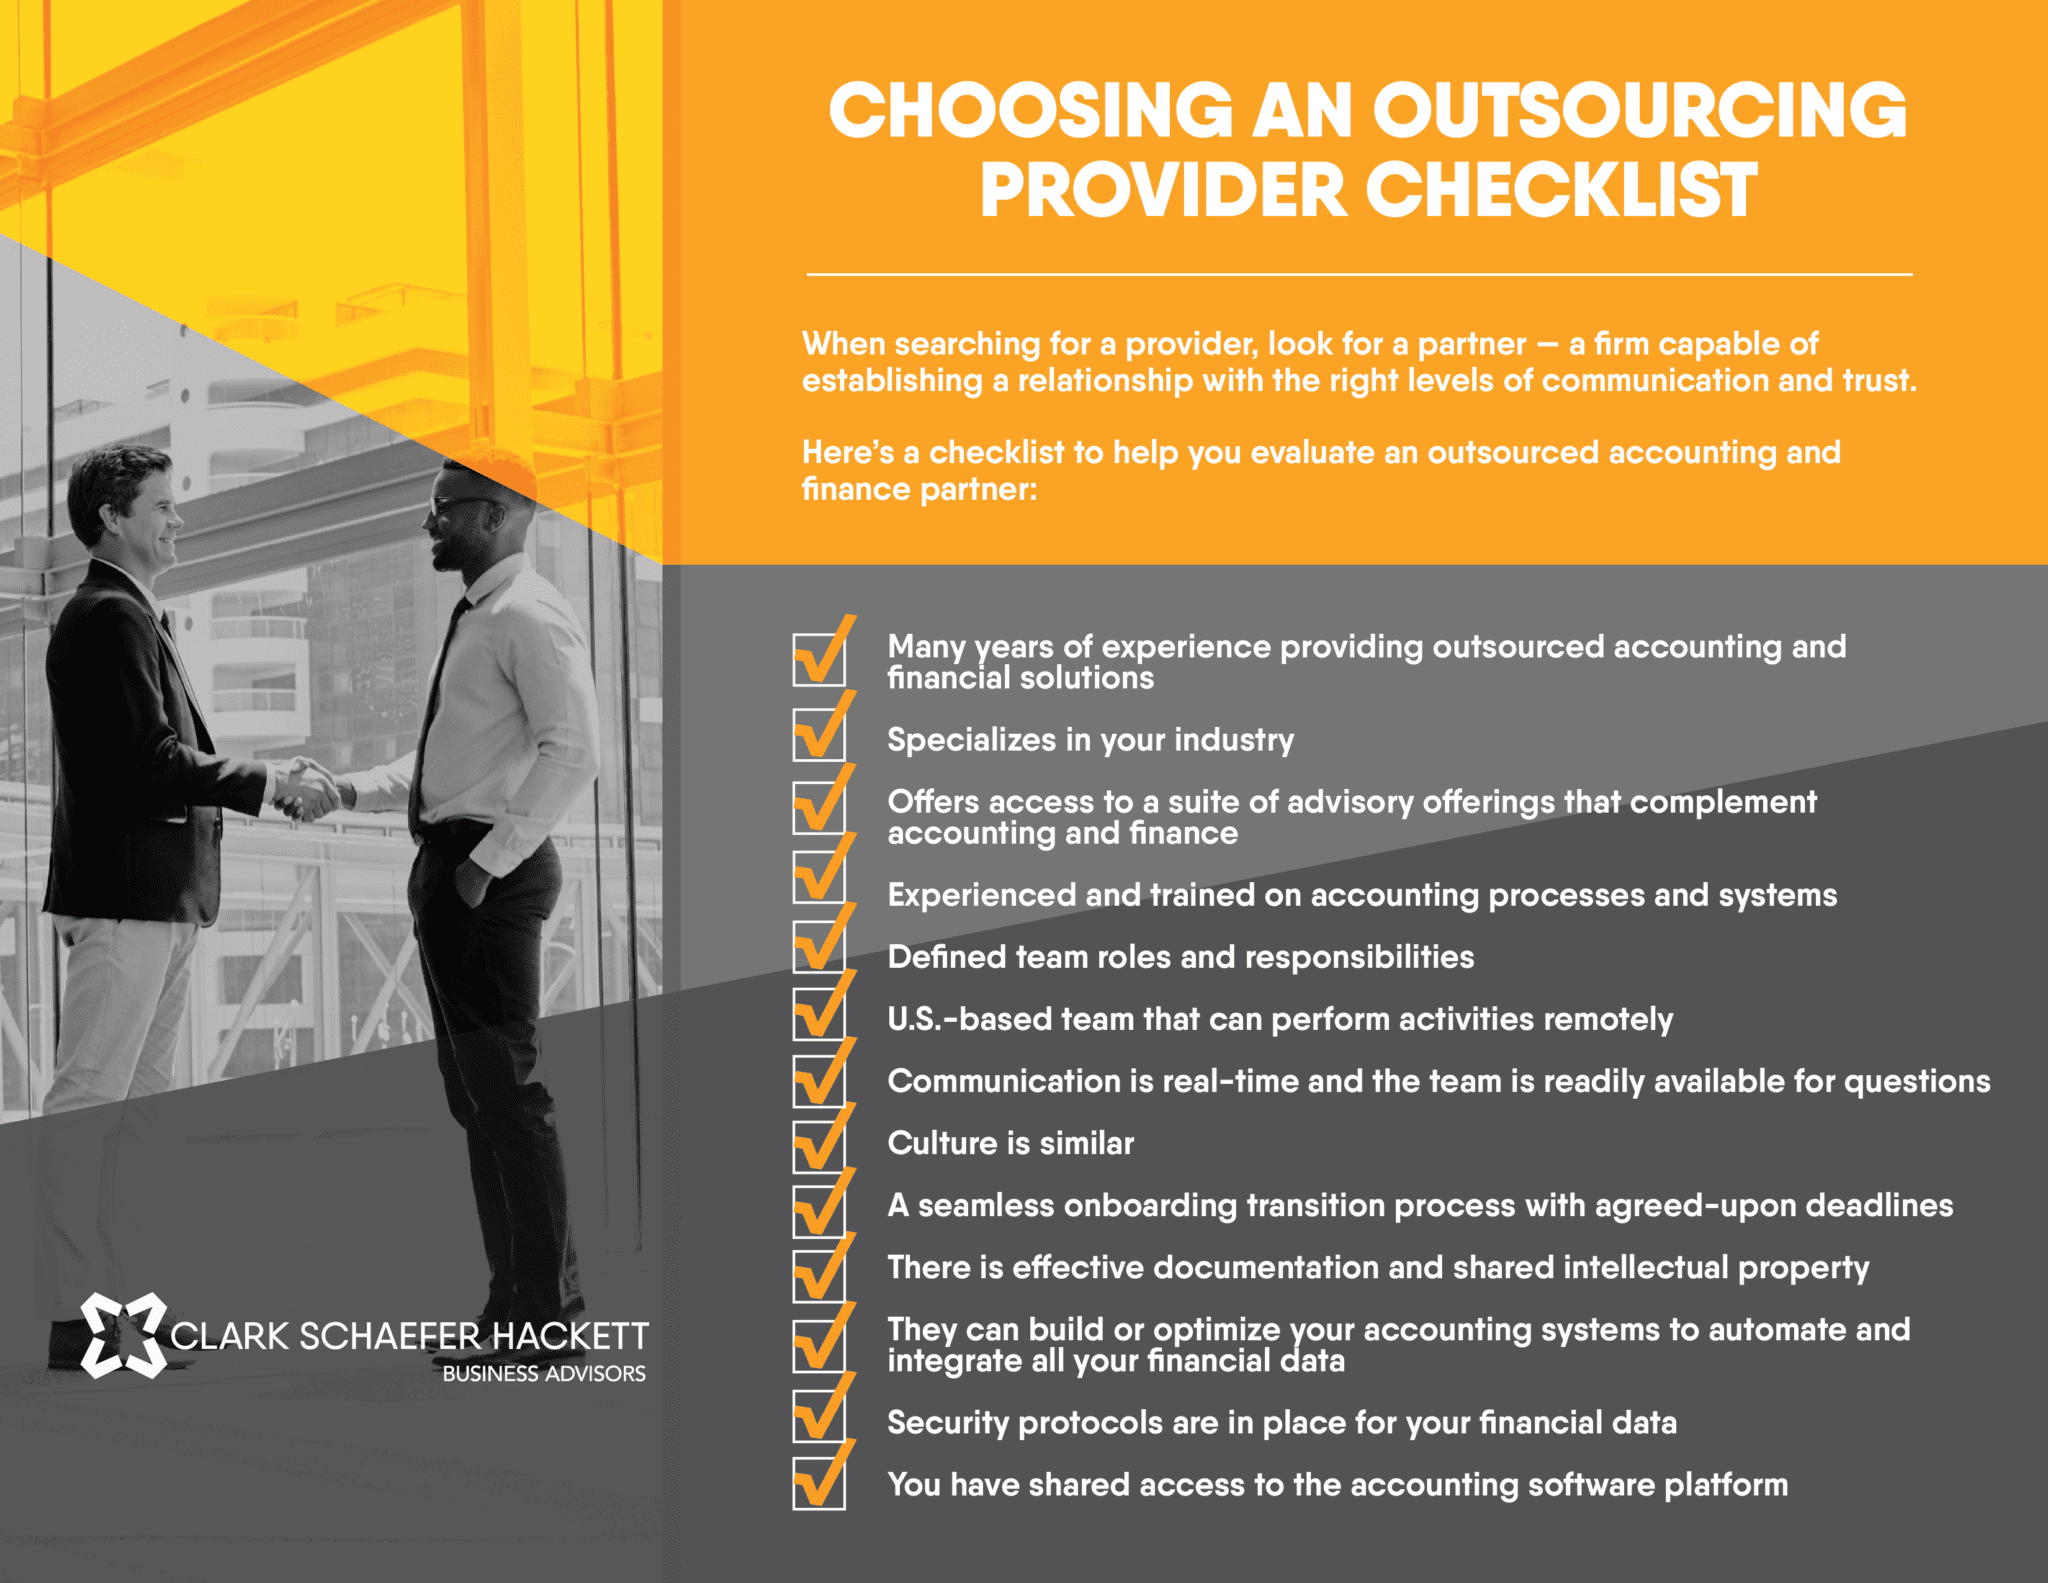 Choosing an outsourced provider checklist